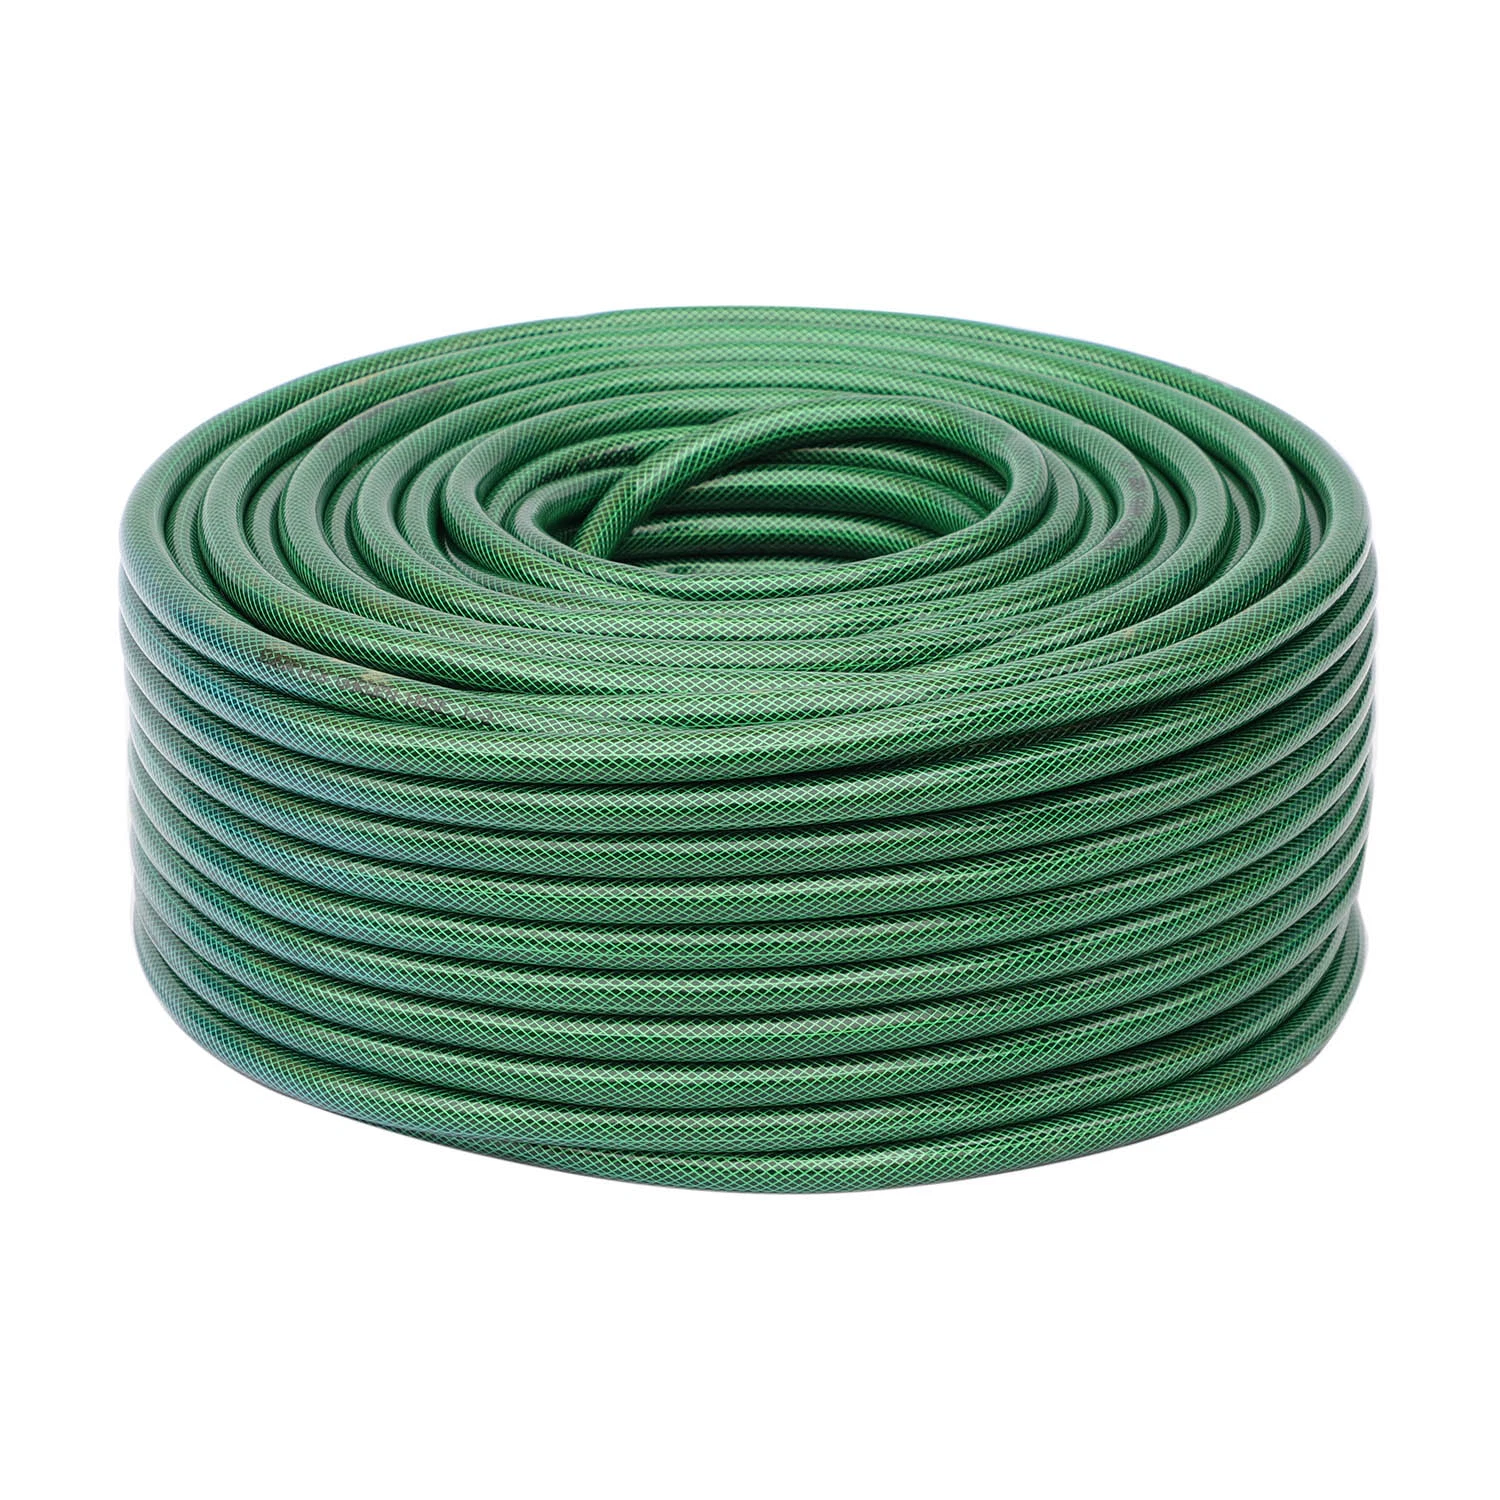 Customized 3 Layer High Pressure Home Car Garden Polyester Fiber Reinforced PVC Watering Irrigation Hose Pipes